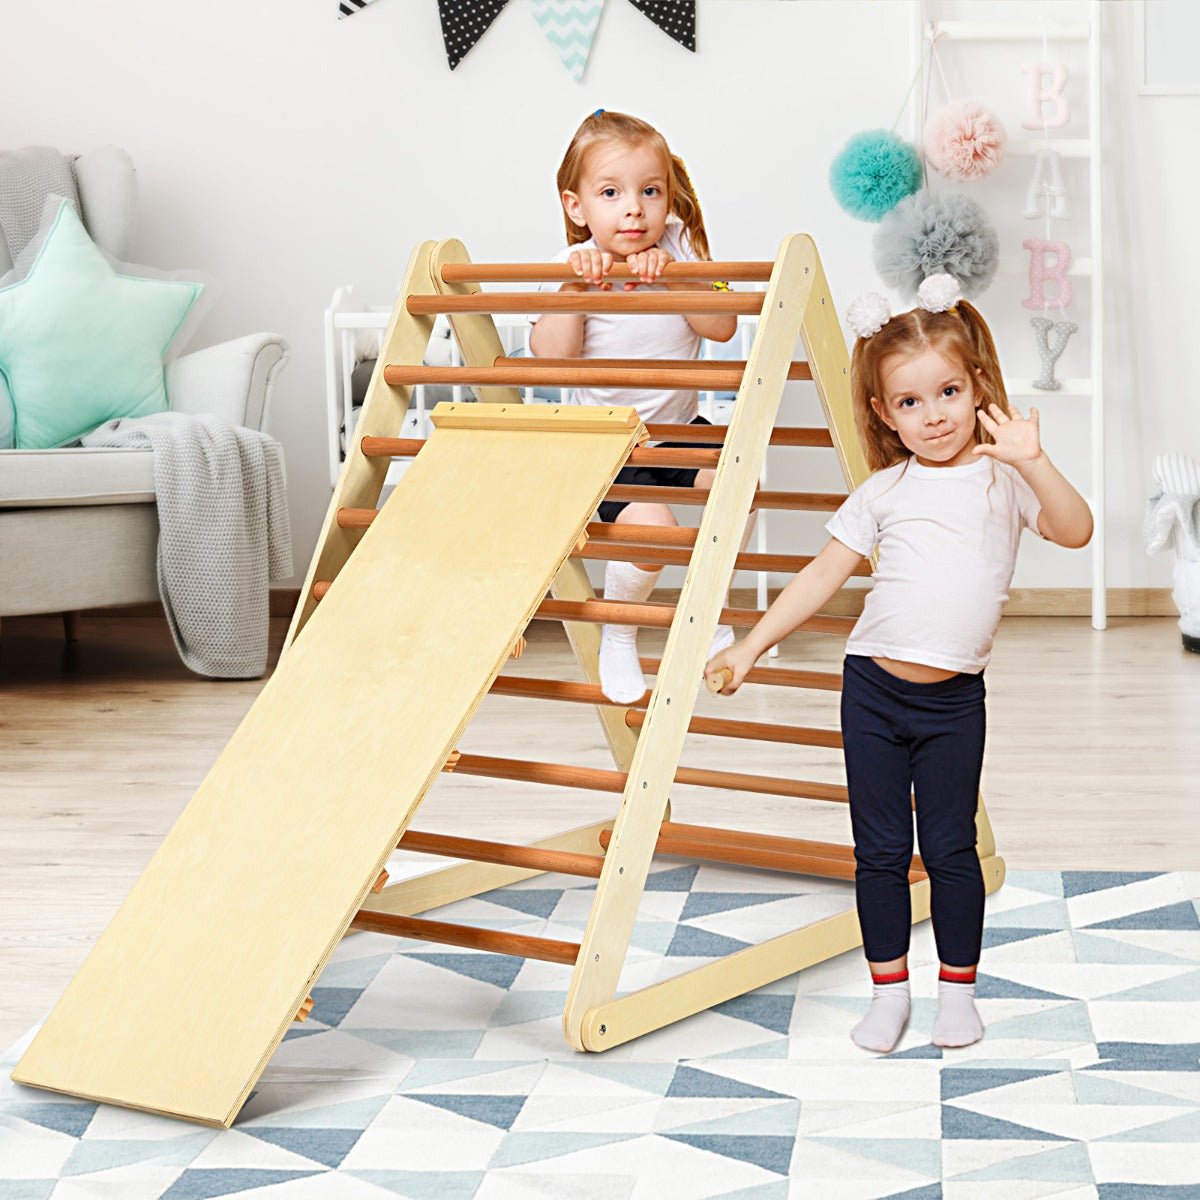 Enhance Play with Natural Wooden Triangle Ladder - Safety Included